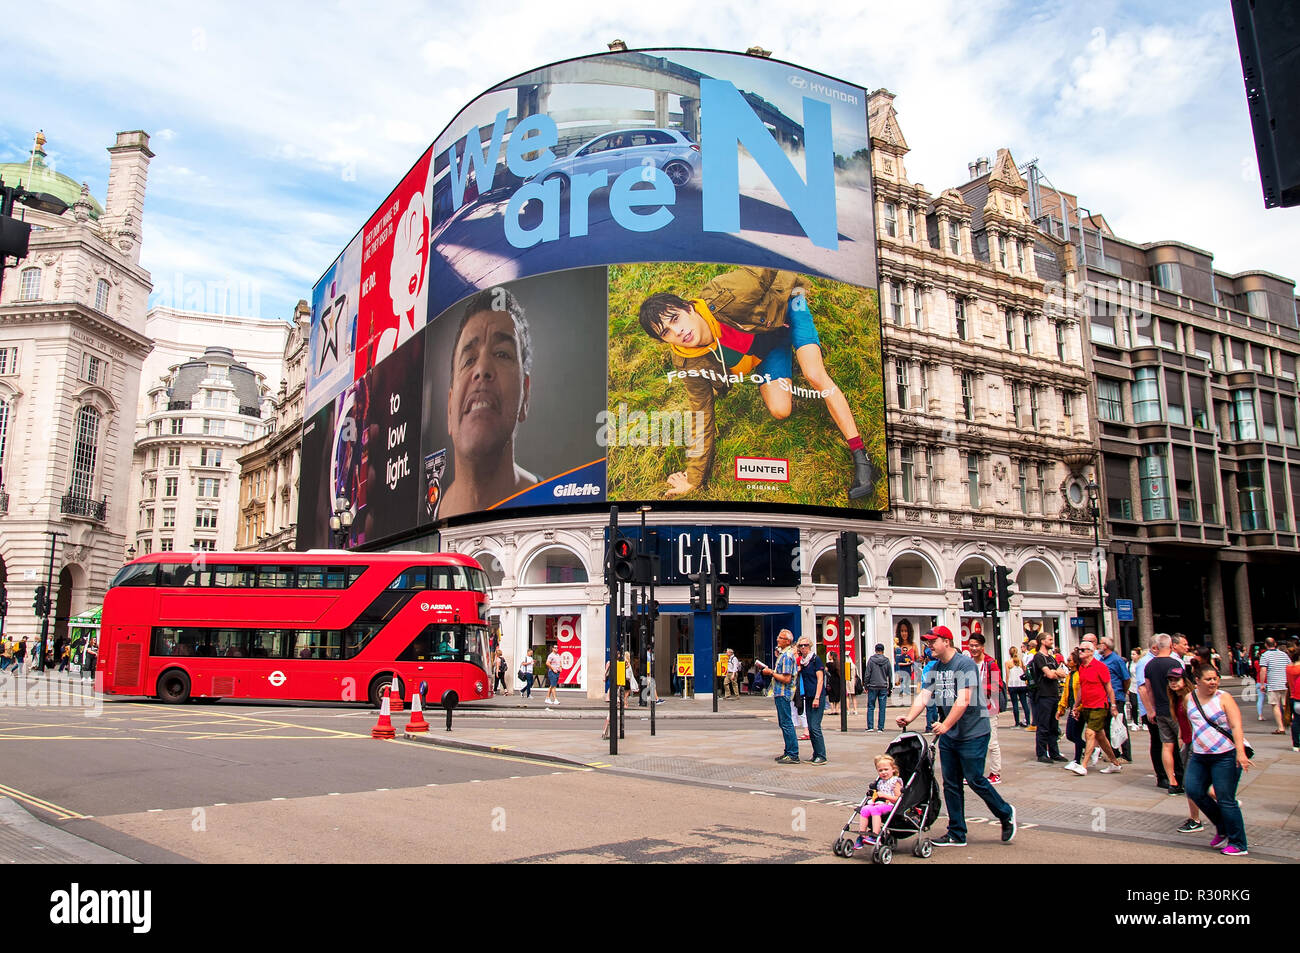 LONDON - JUN 24: Piccadilly Circus on June 24, 2018 in London, United Kingdom. Stock Photo